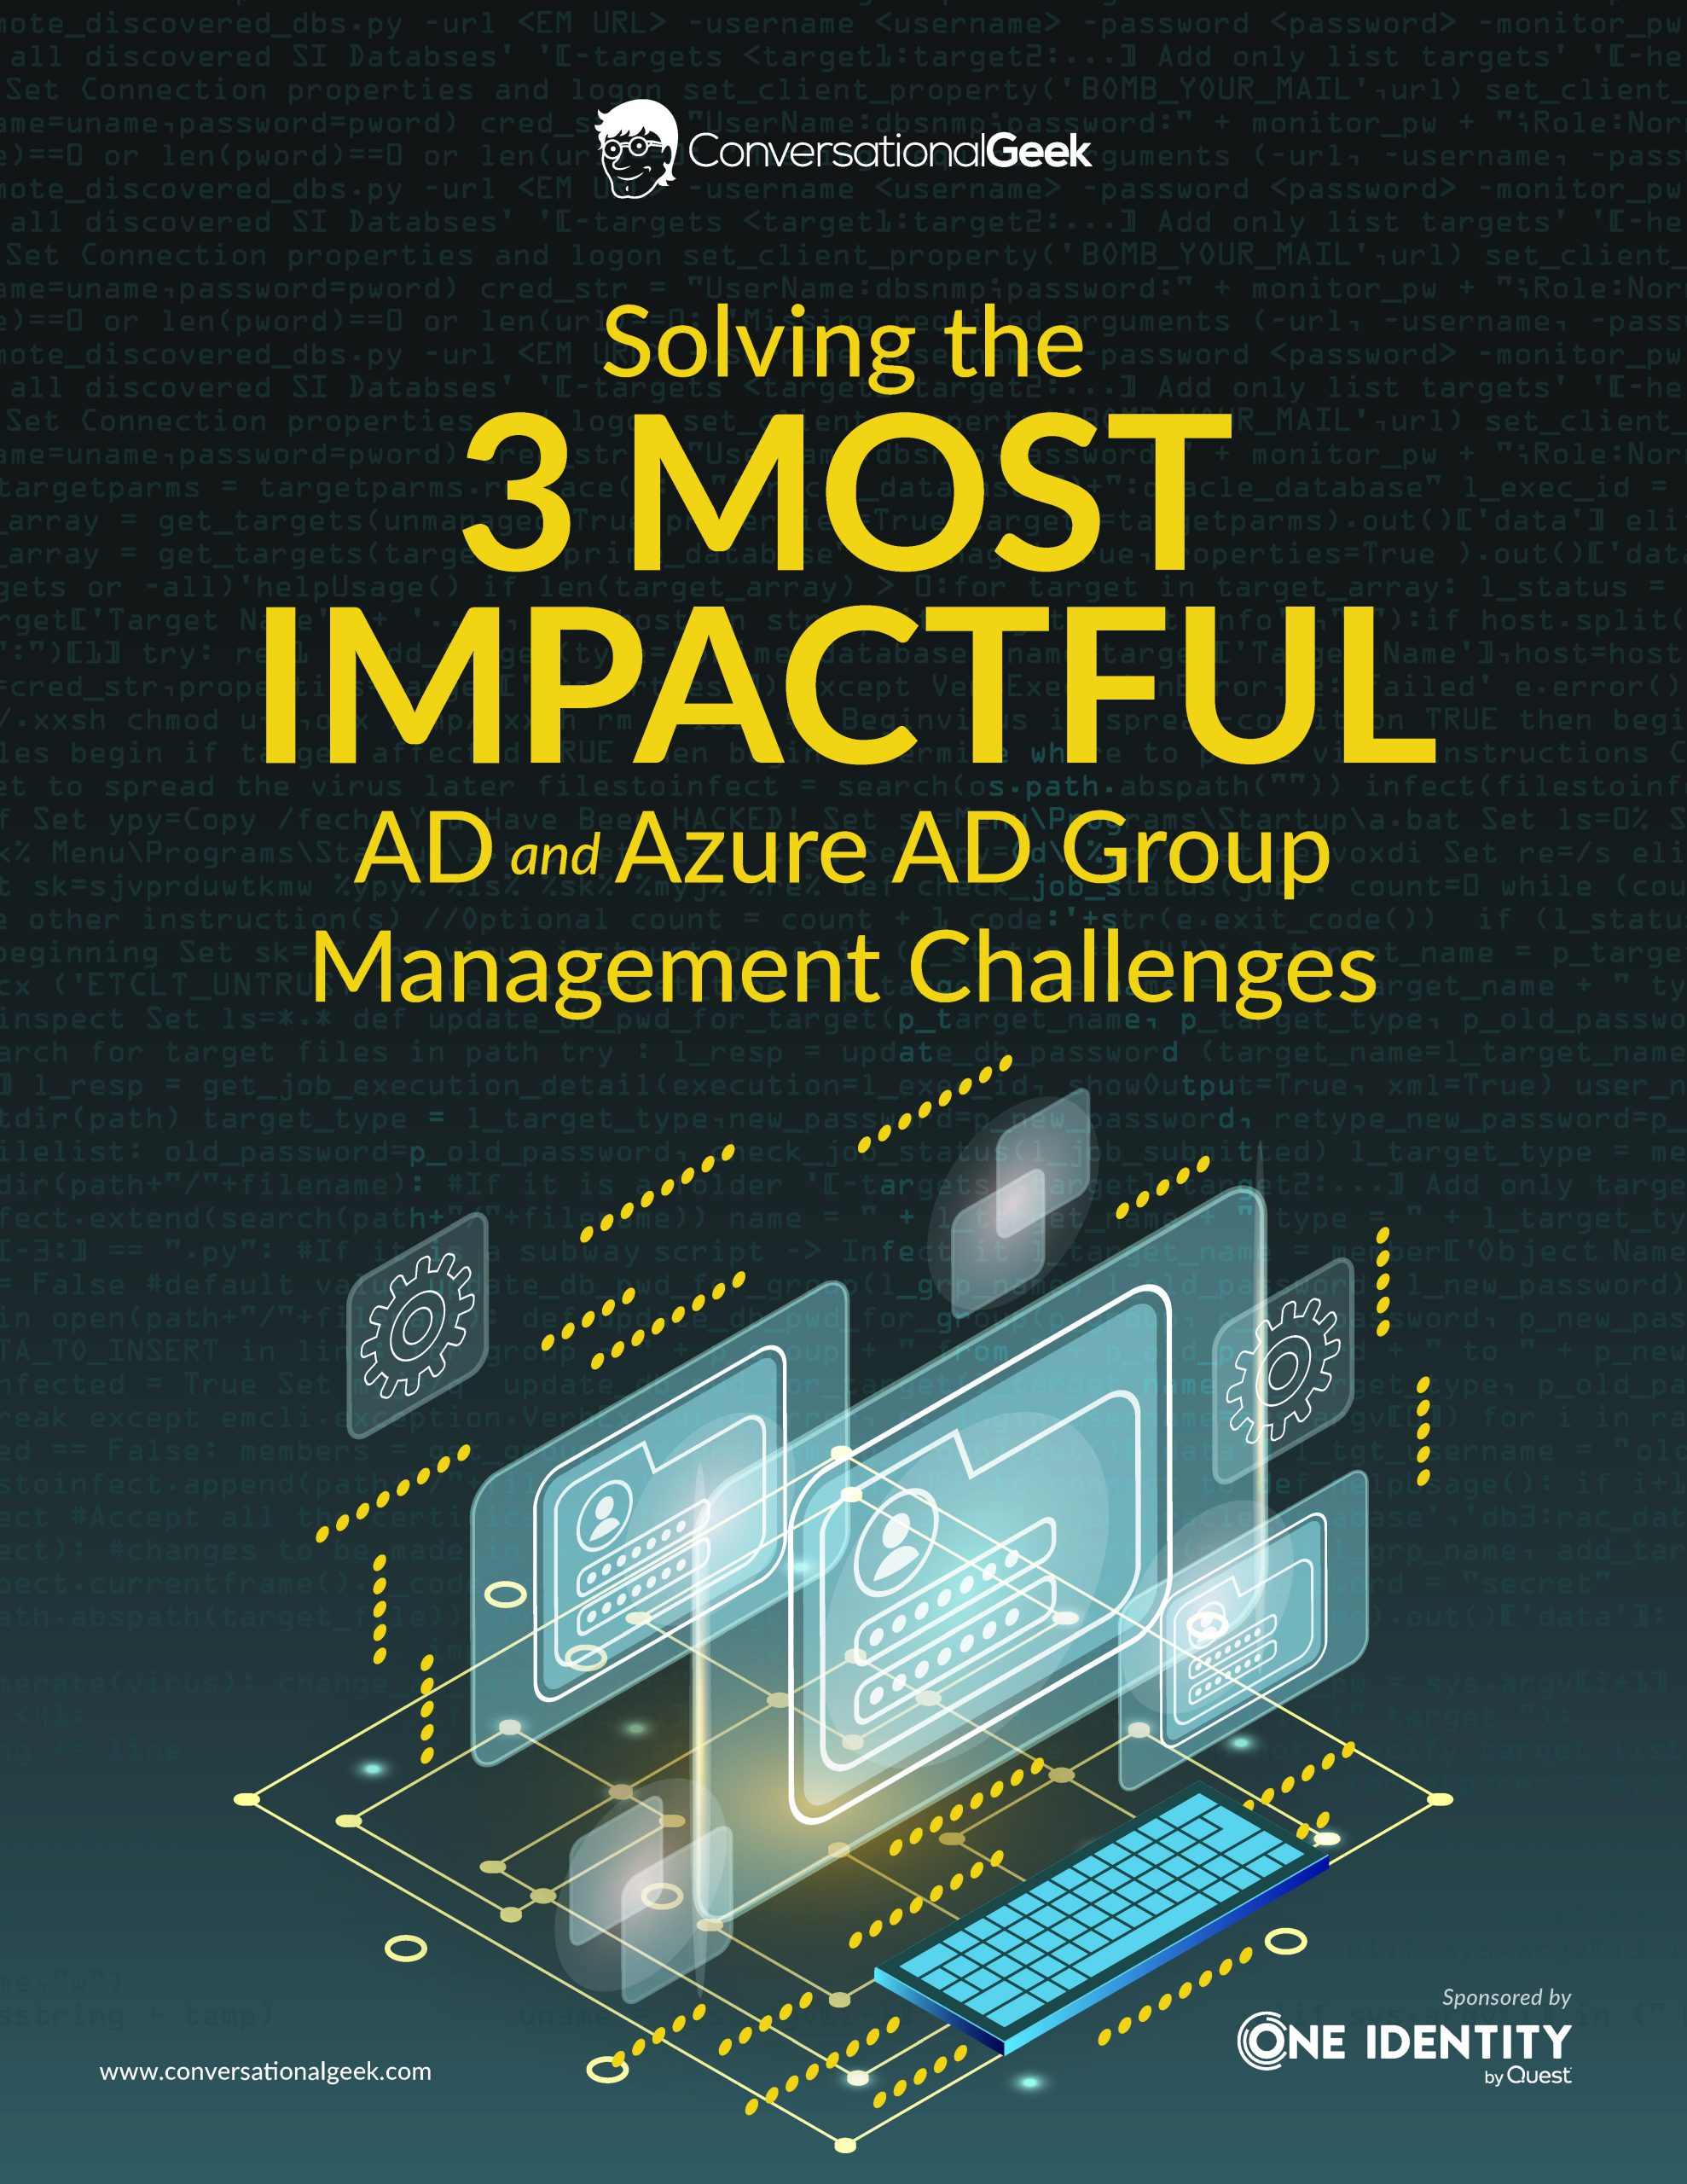 Solving the 3 Most Impactful AD and Azure AD Group Management Challenges